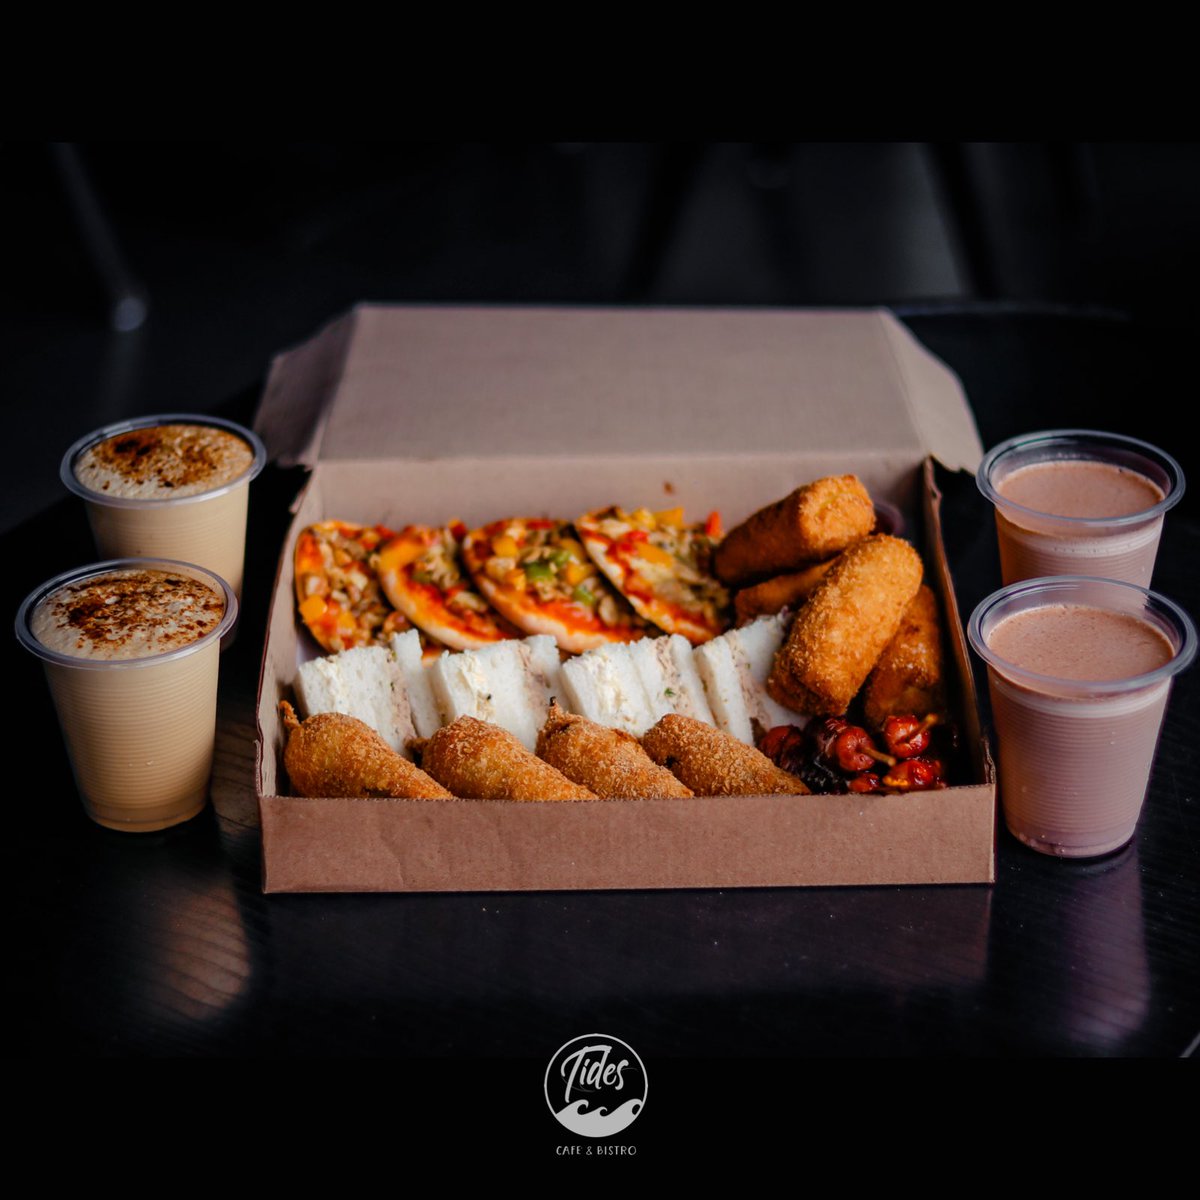 Have you tried our Combo Snack box? 🔥
#tidescafeandbistro #tidesmv #food #goodfood #menu #fooddiary #snacks #snack #combo #combomeal #box #snackbox #iced #coffee #milo #icedcoffee #icedmilo #pizza #sausage #BBQ #spicy #tuna #stuffed #capsicum #egg #sandwich #chinese #rolls